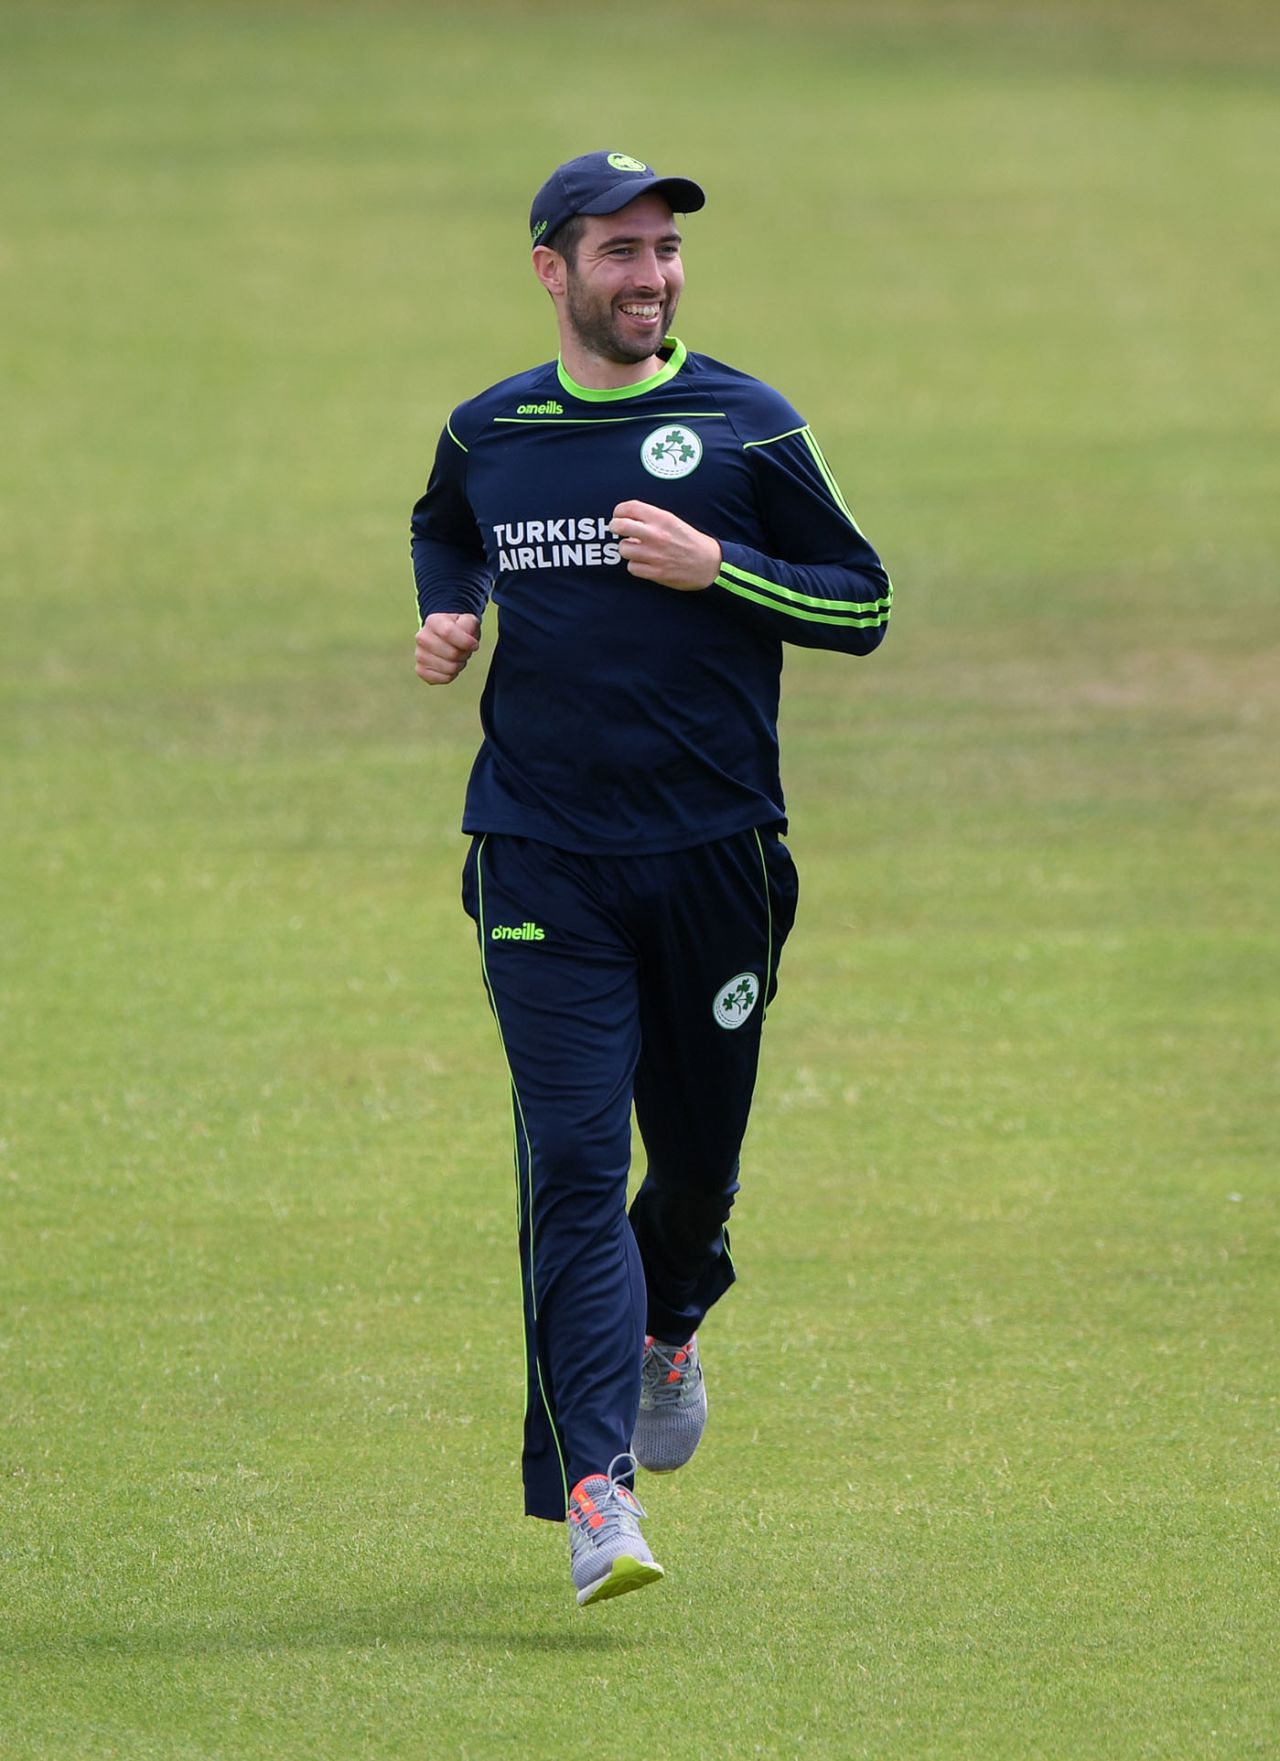 Andy Balbirnie was all smiles in training, Ageas Bowl, August 3, 2020